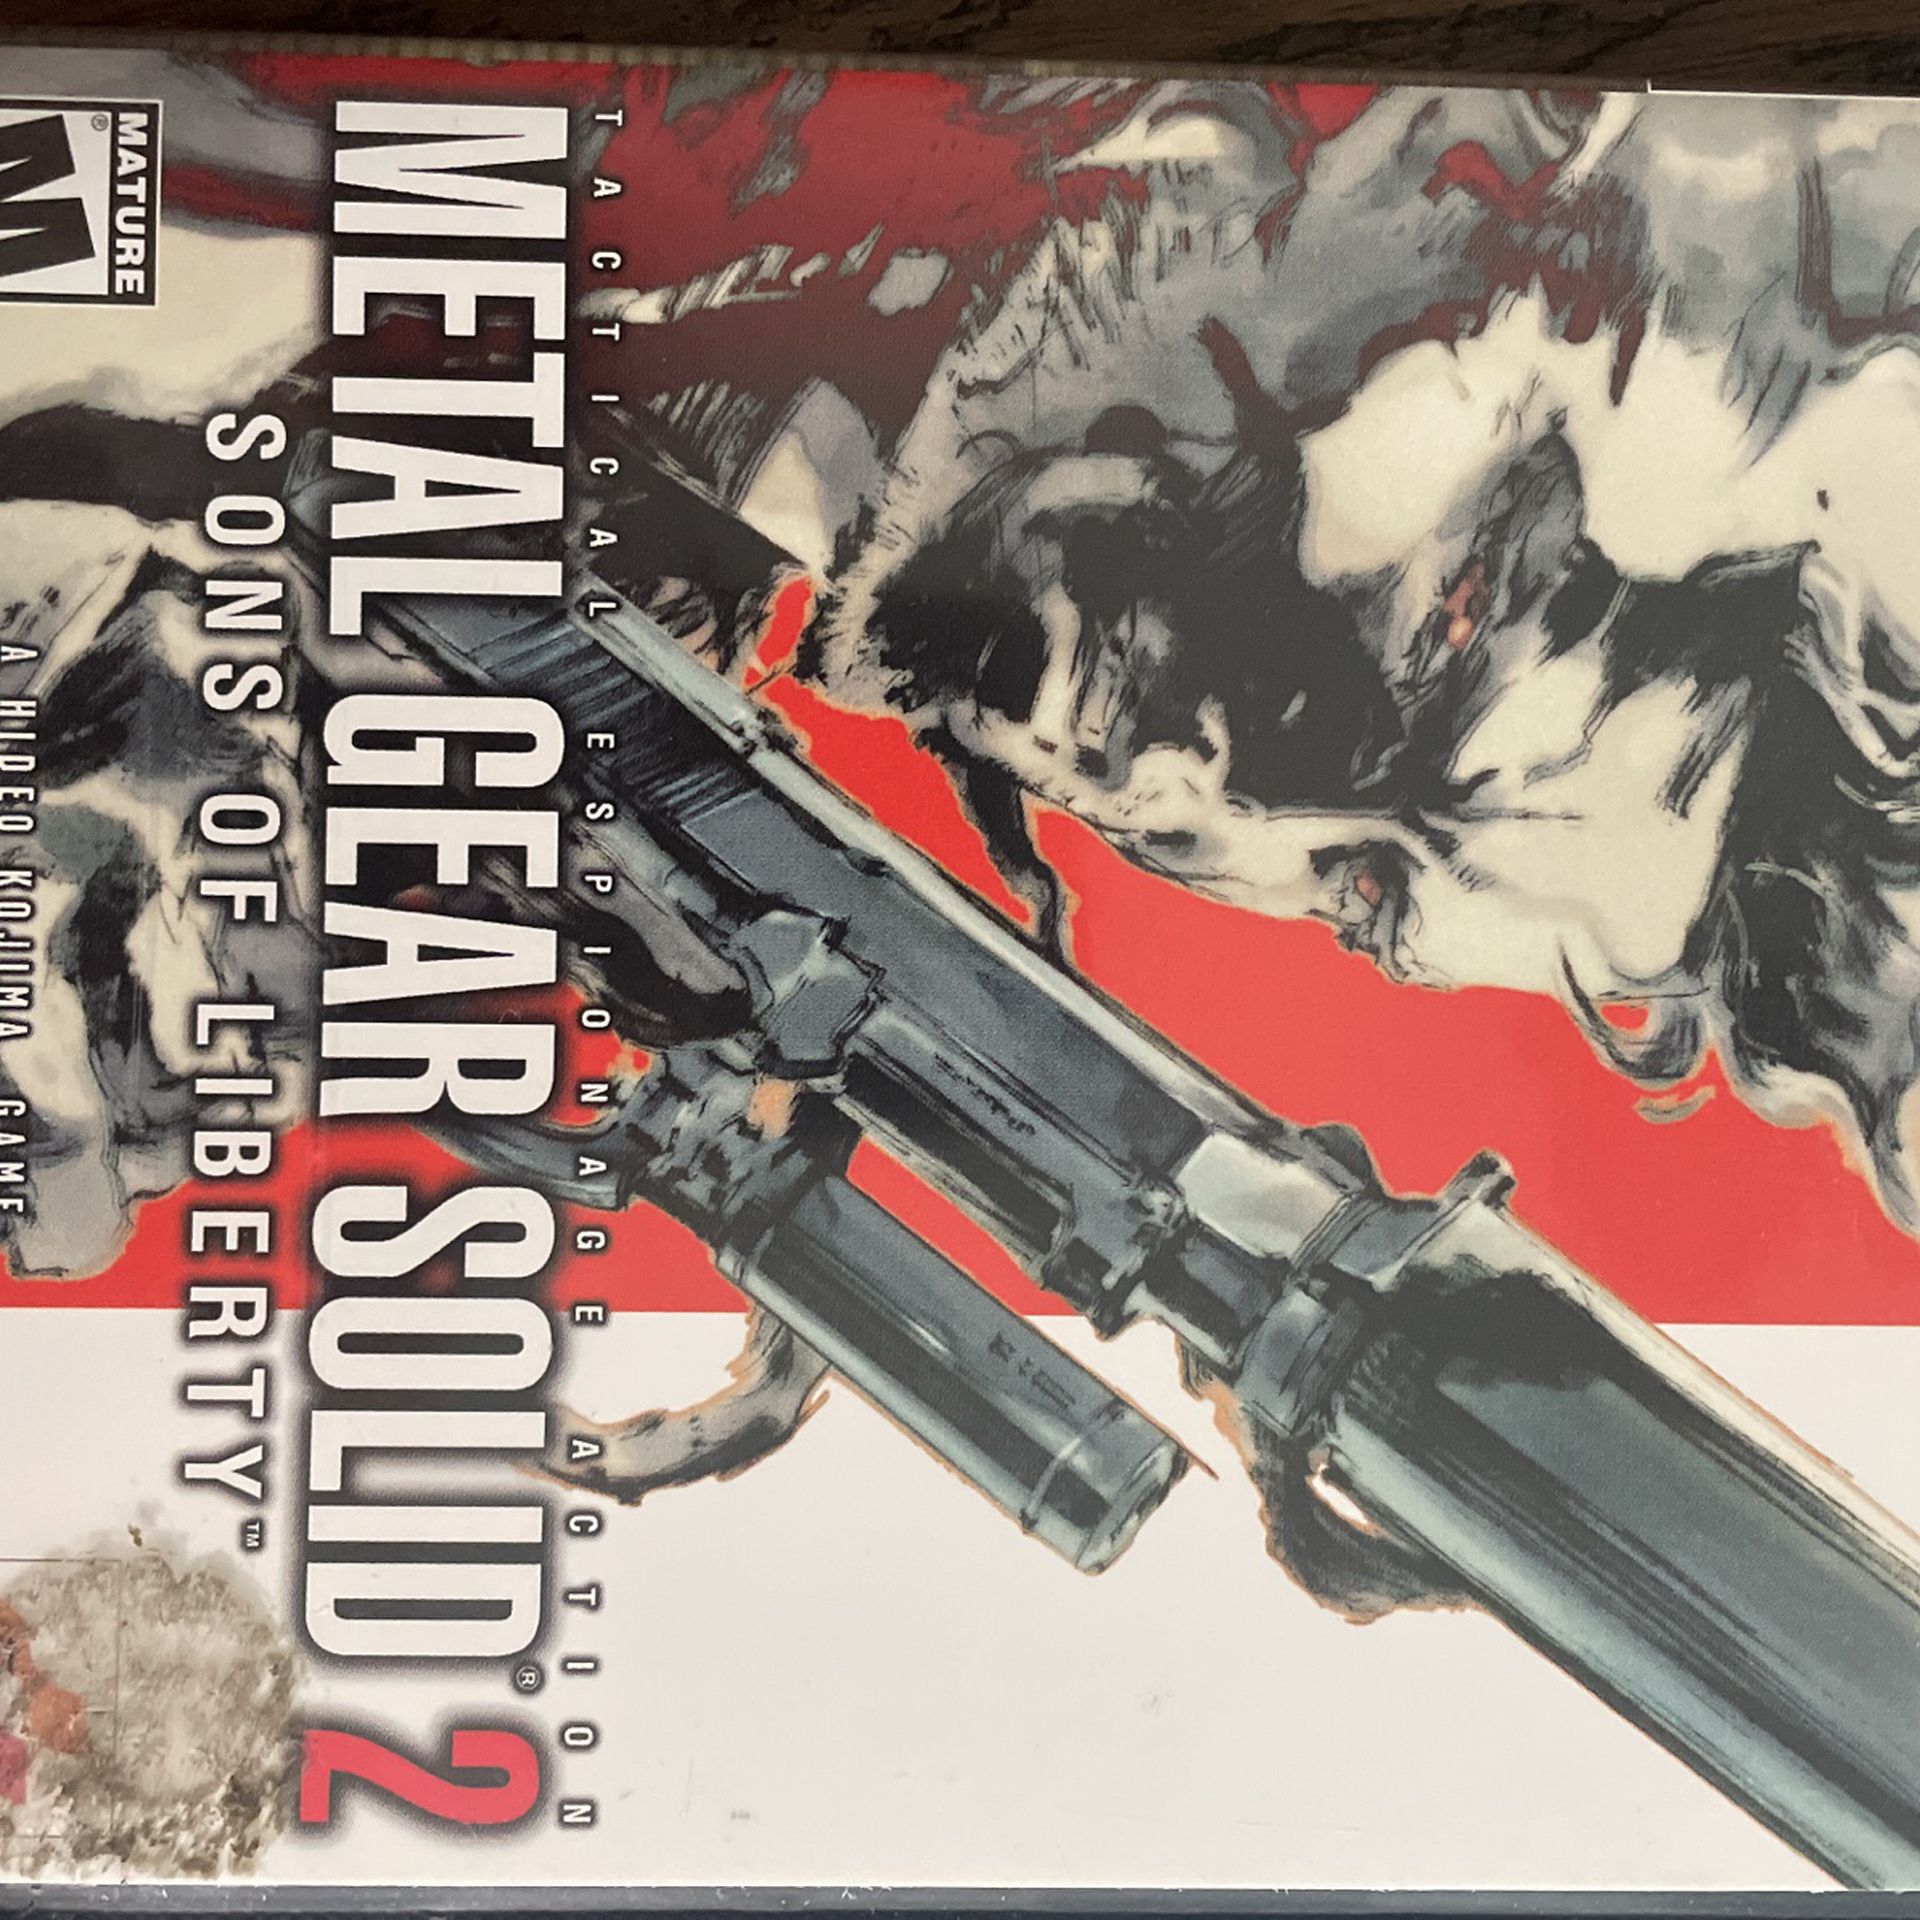 Metal Gear Solid 2 Sons Of Liberty Ps2